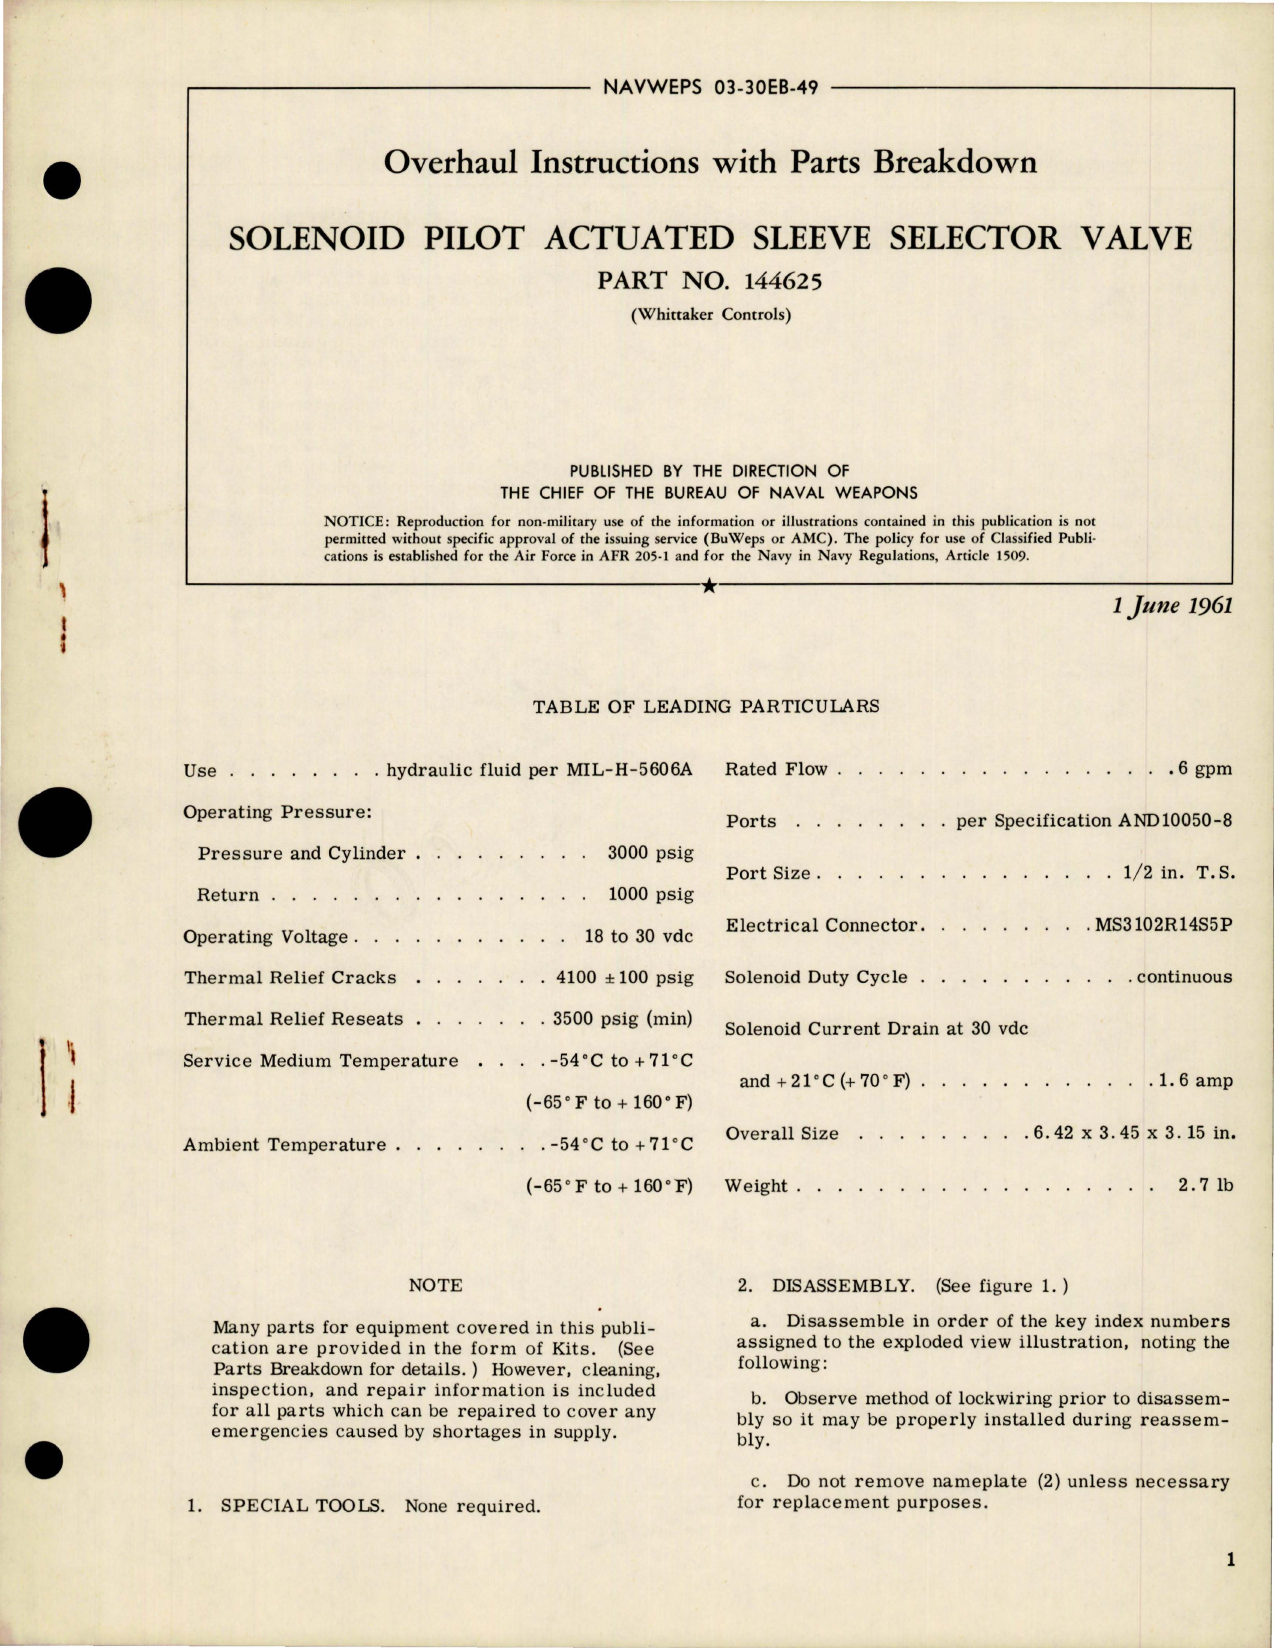 Sample page 1 from AirCorps Library document: Overhaul Instructions with Parts for Solenoid Pilot Actuated Sleeve Selector Valve - Part 144625 